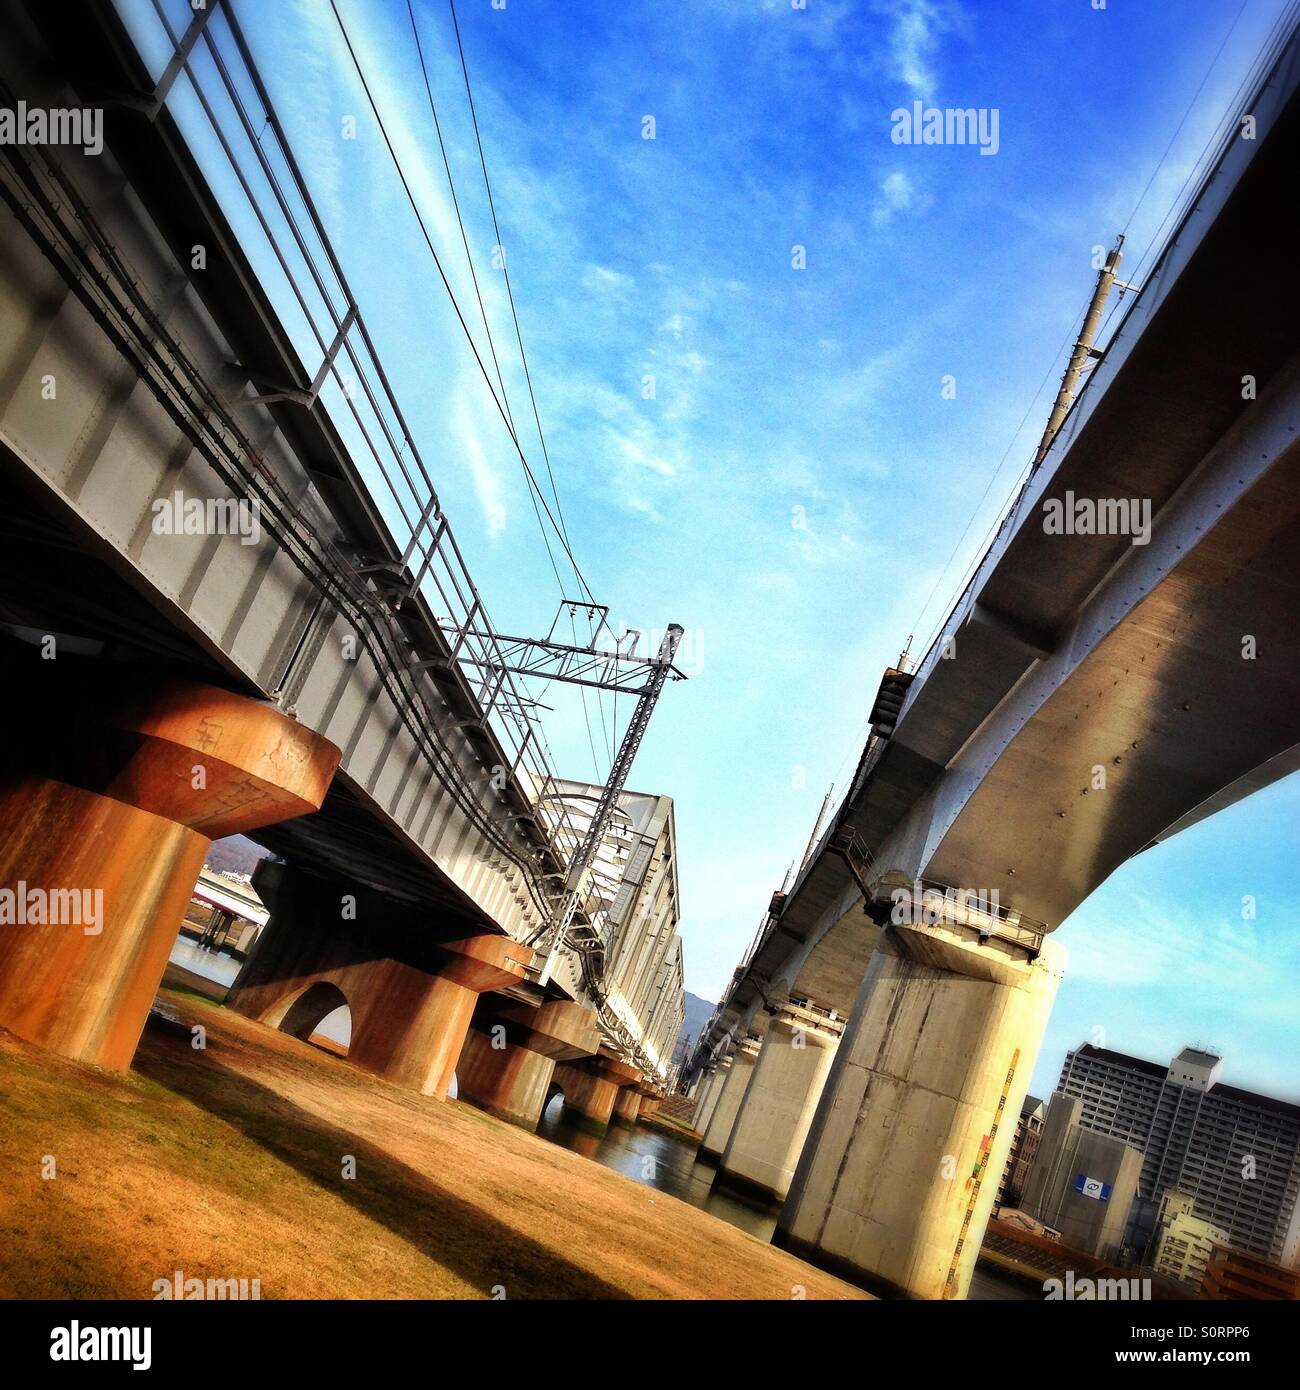 Elevated railway and road Stock Photo